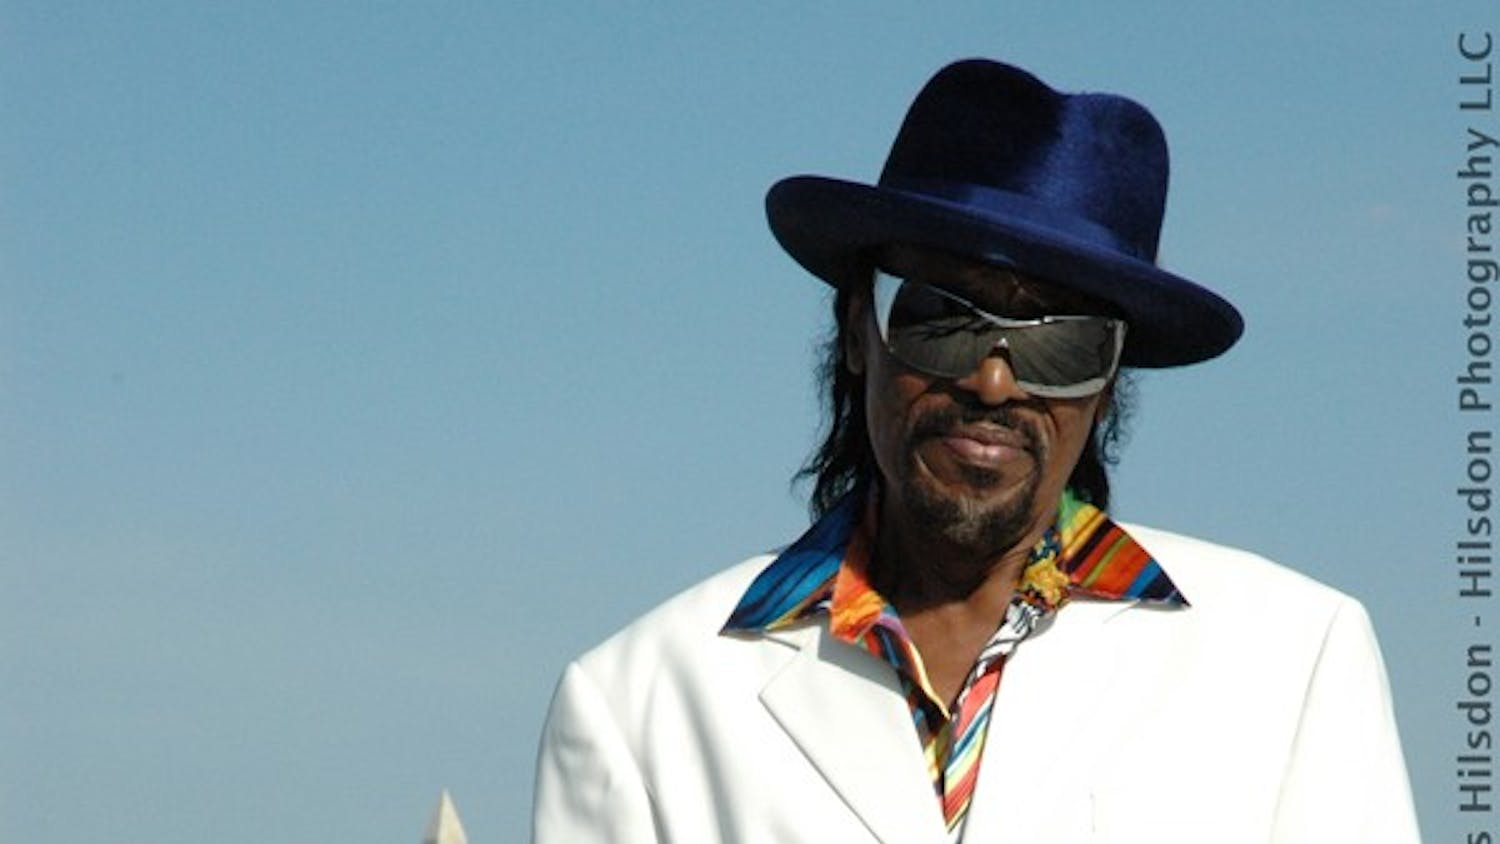 GODFATHER OF GO-GO - Chuck Brown is often credited as being the founder of go-go. The musical style is one of D.C.â€™s most notable cultural exports, representing a blend of funk, blues, R&B and hip-hop. The genre is still popular in the D.C.-metro area.